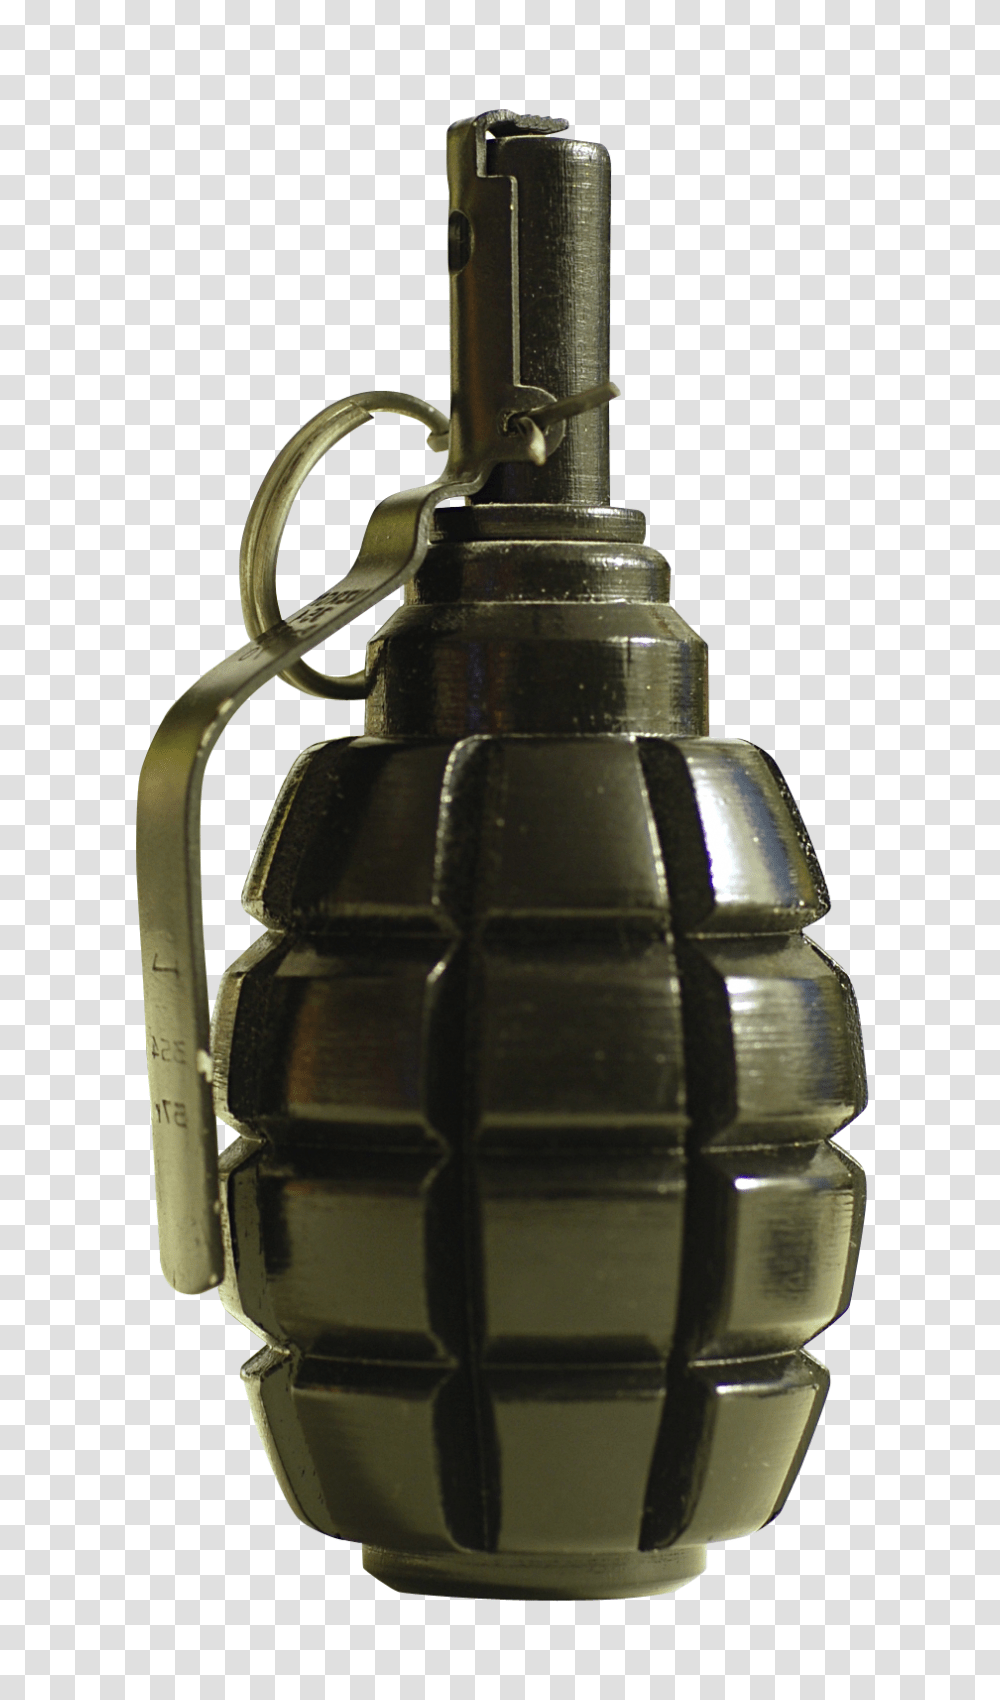 Hand Grenade Image Hand Granade, Bomb, Weapon, Weaponry Transparent Png